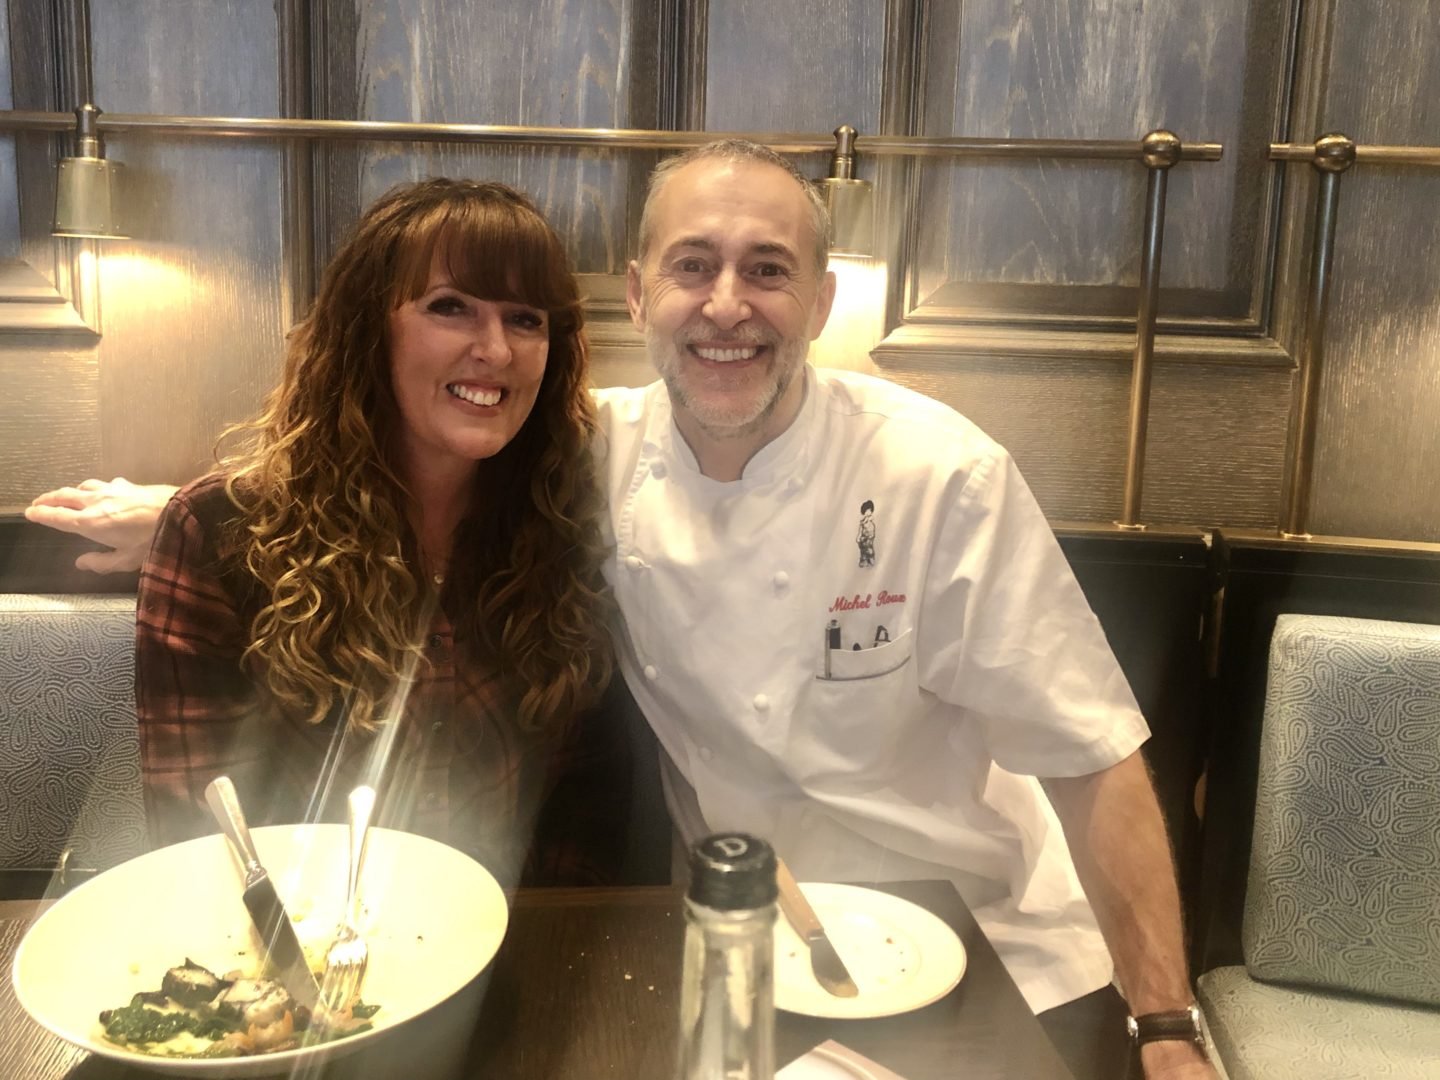 chef-hosted lunch with Michel Roux Jr at The Landau. The London Restaurant festival